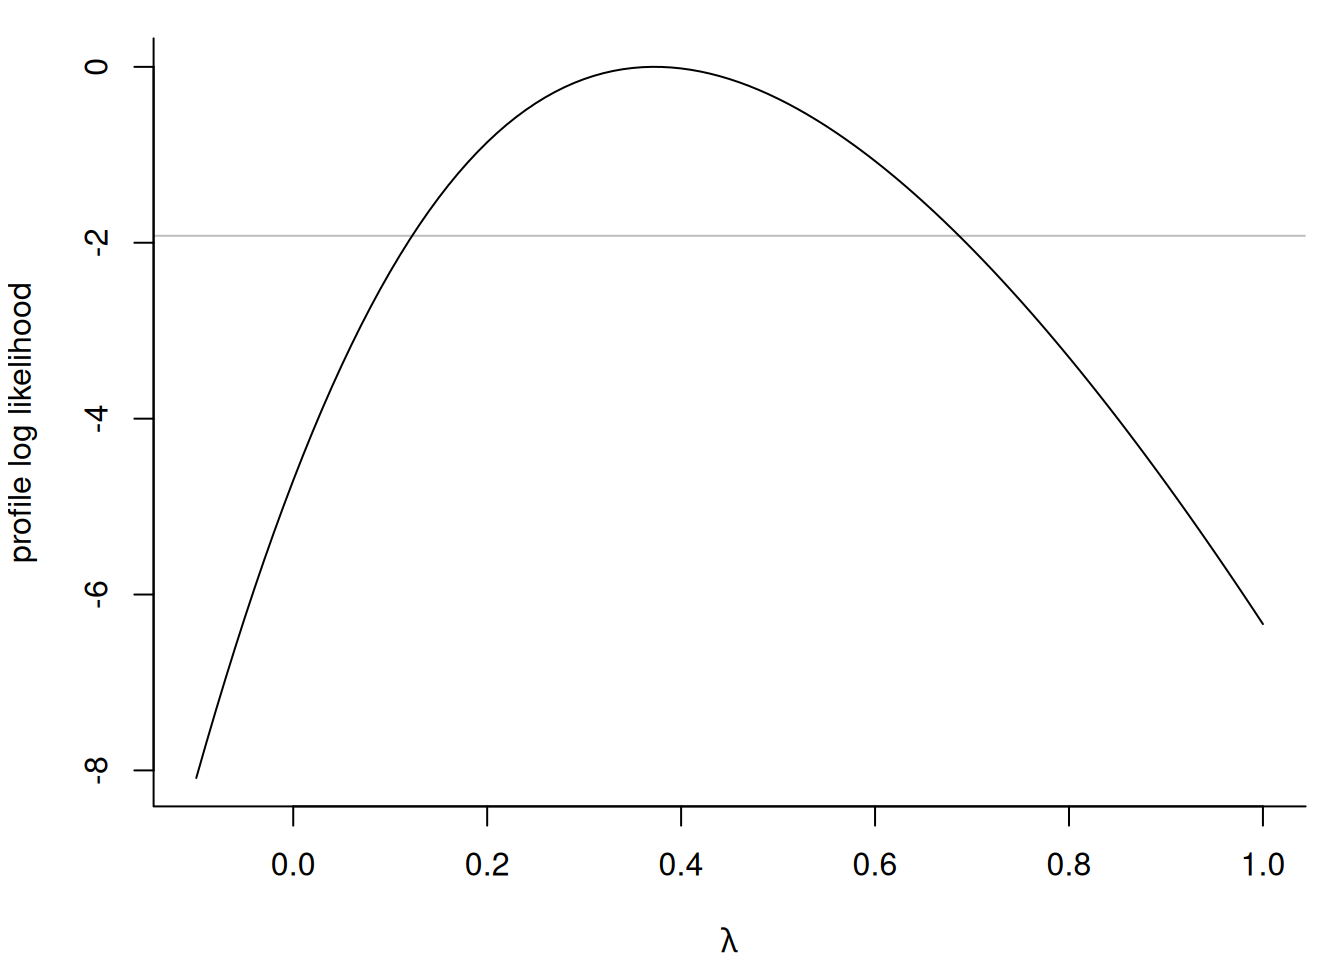 Profile log likelihood for the Box--Cox transformation for the waiting time data